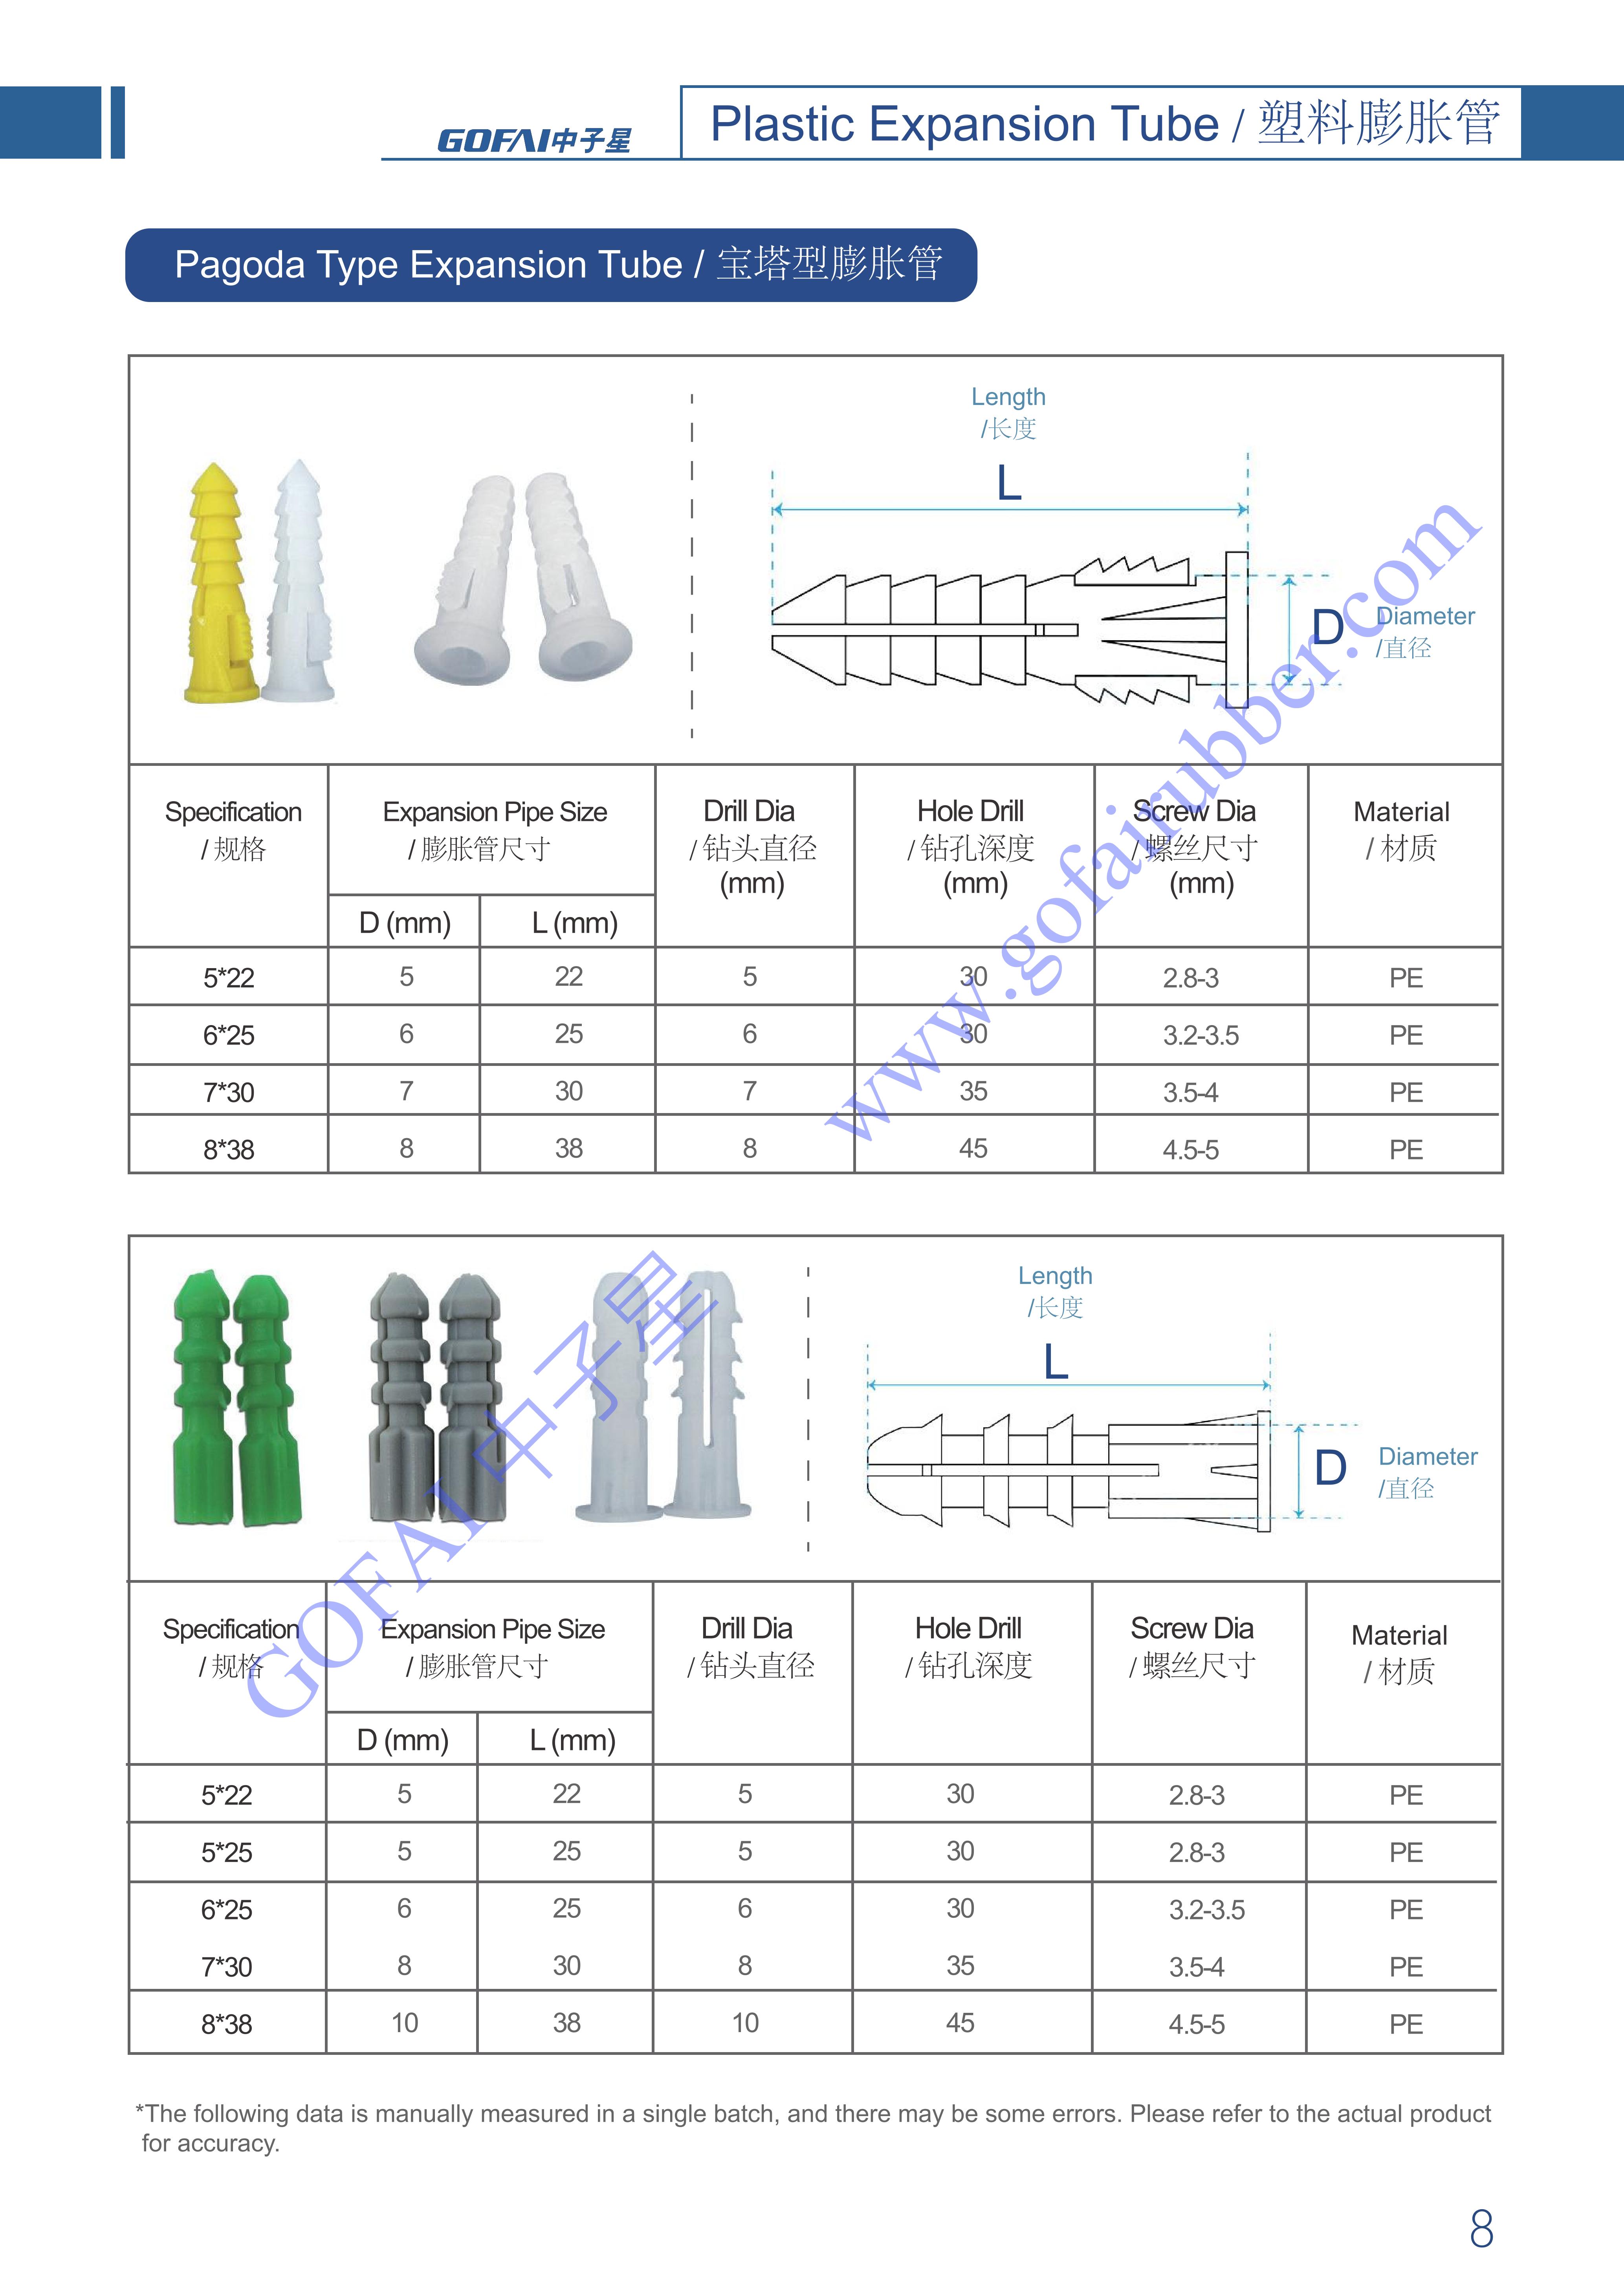 GOFAI Plastic Expansion Tube Series Products Brochure_9.jpg